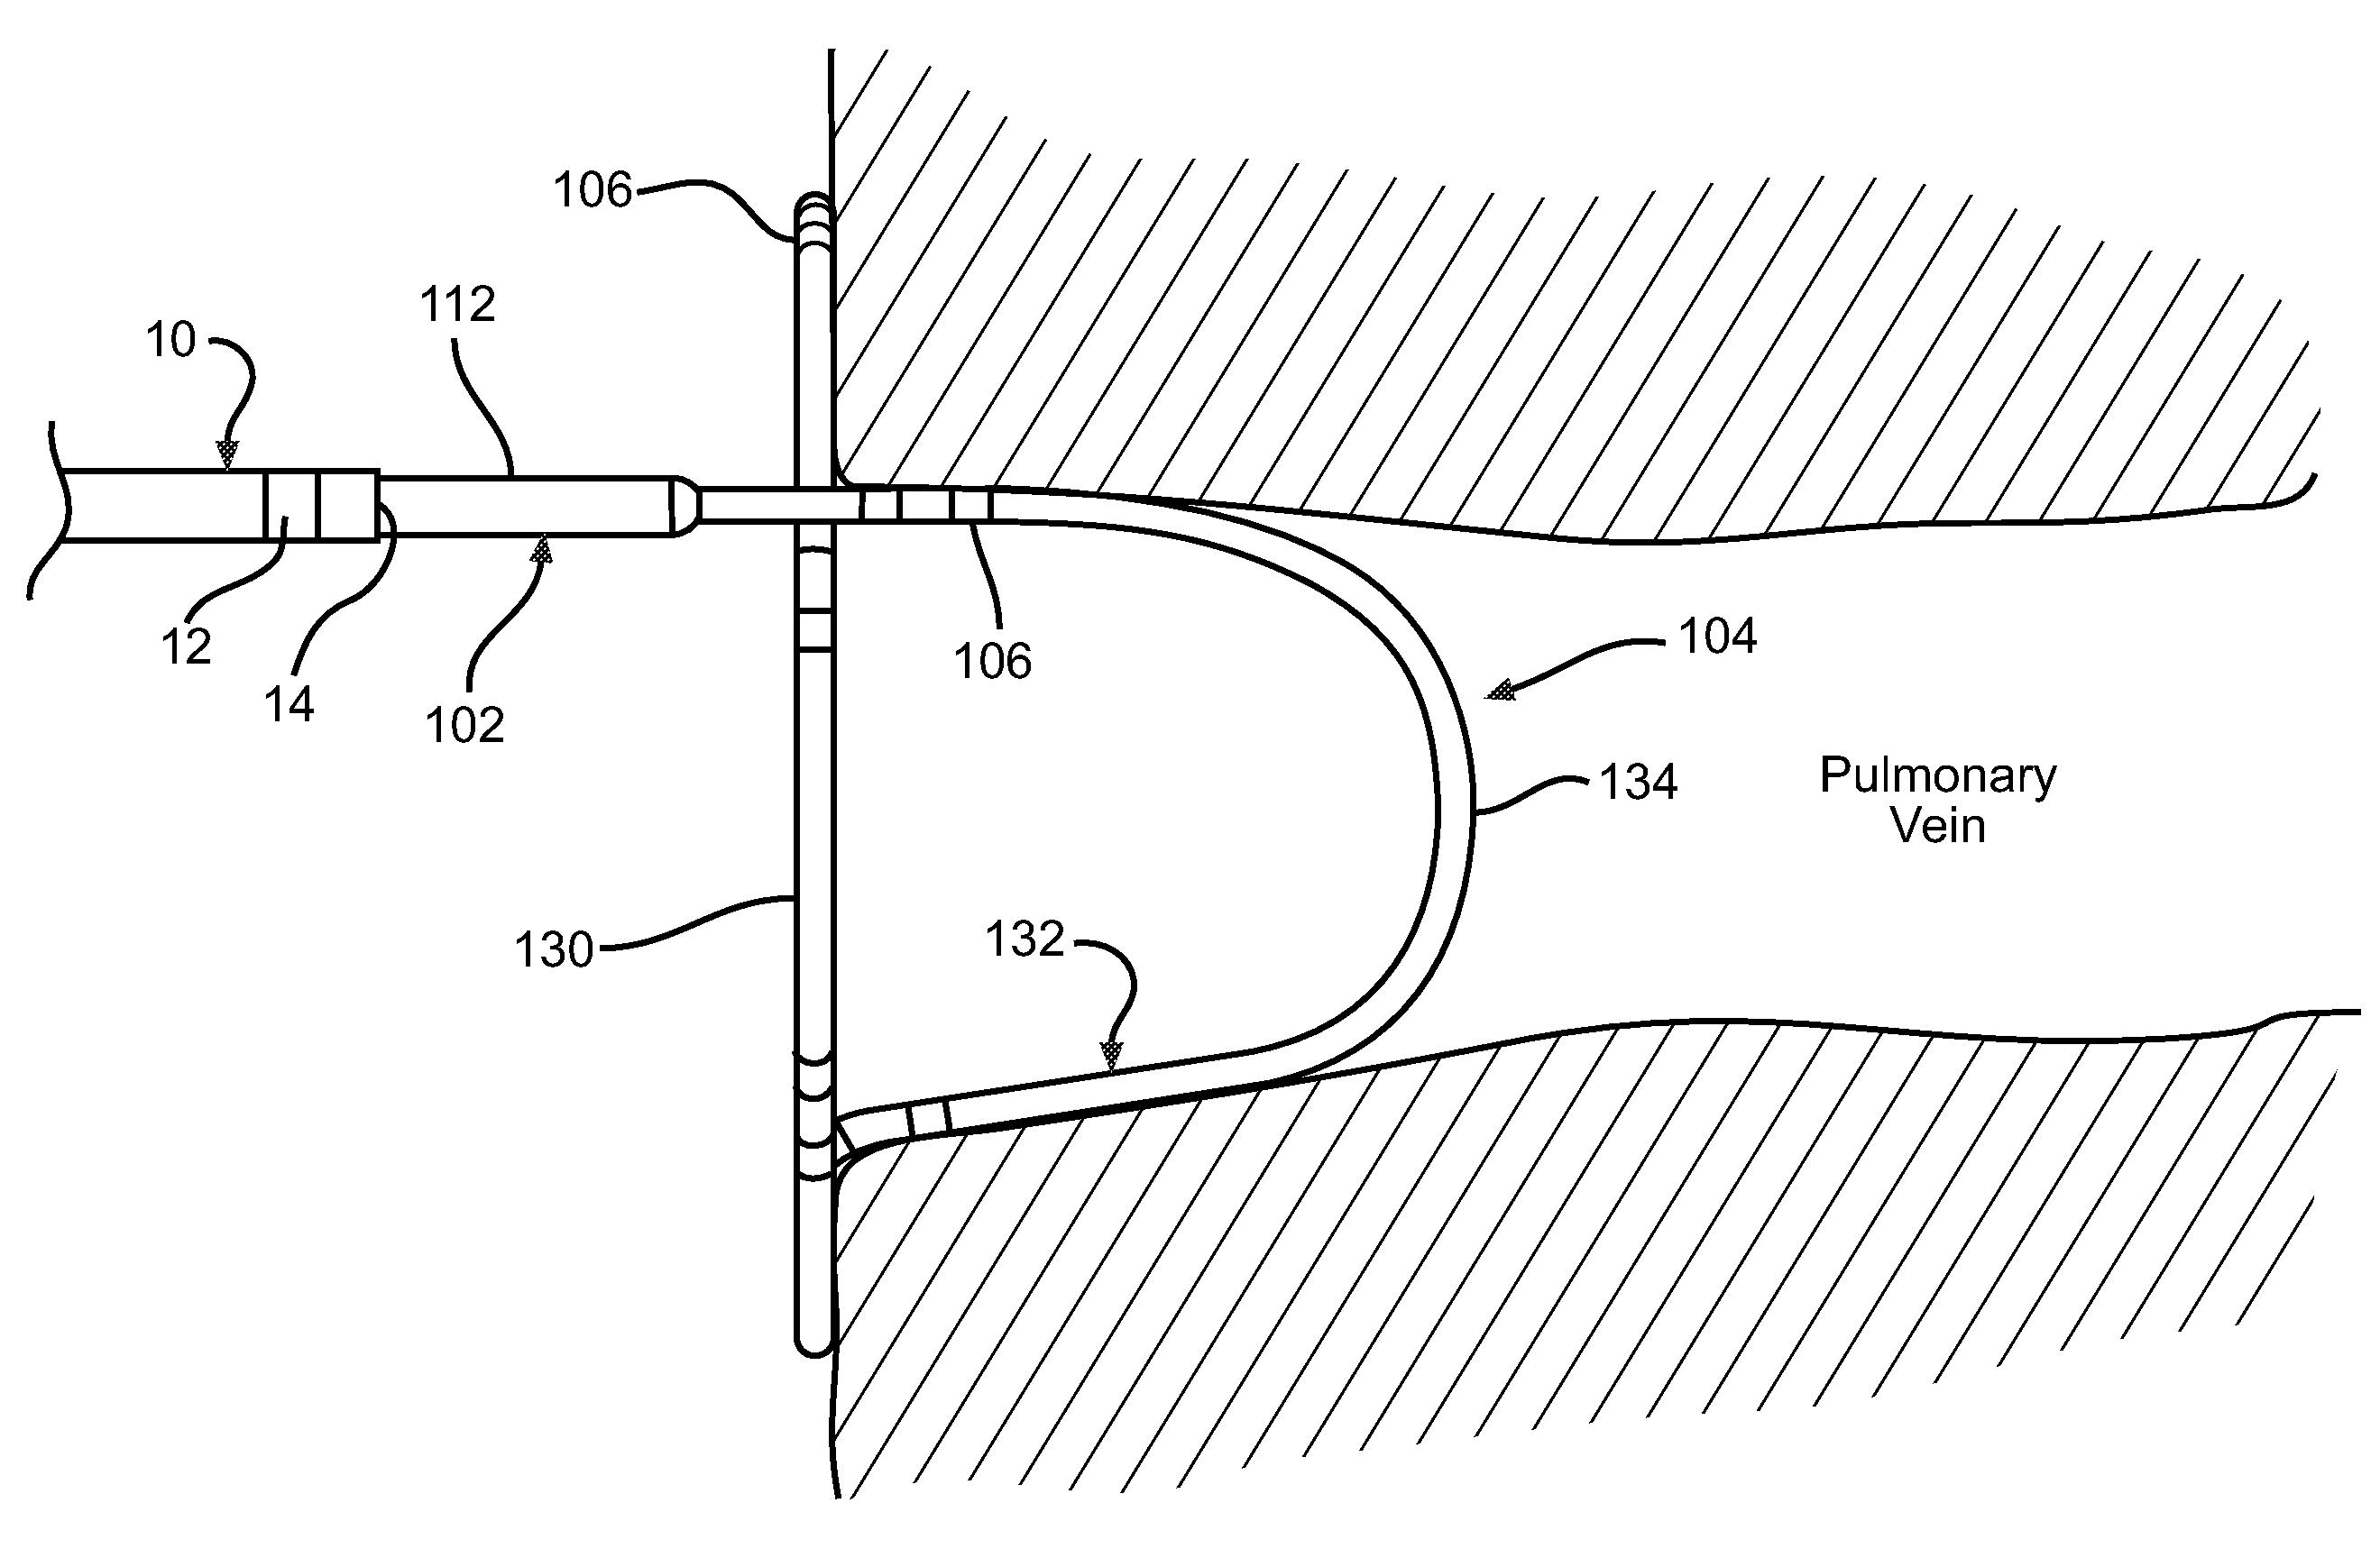 Loop Structures For Supporting Diagnostic and/or Therapeutic Elements in Contact With Tissue